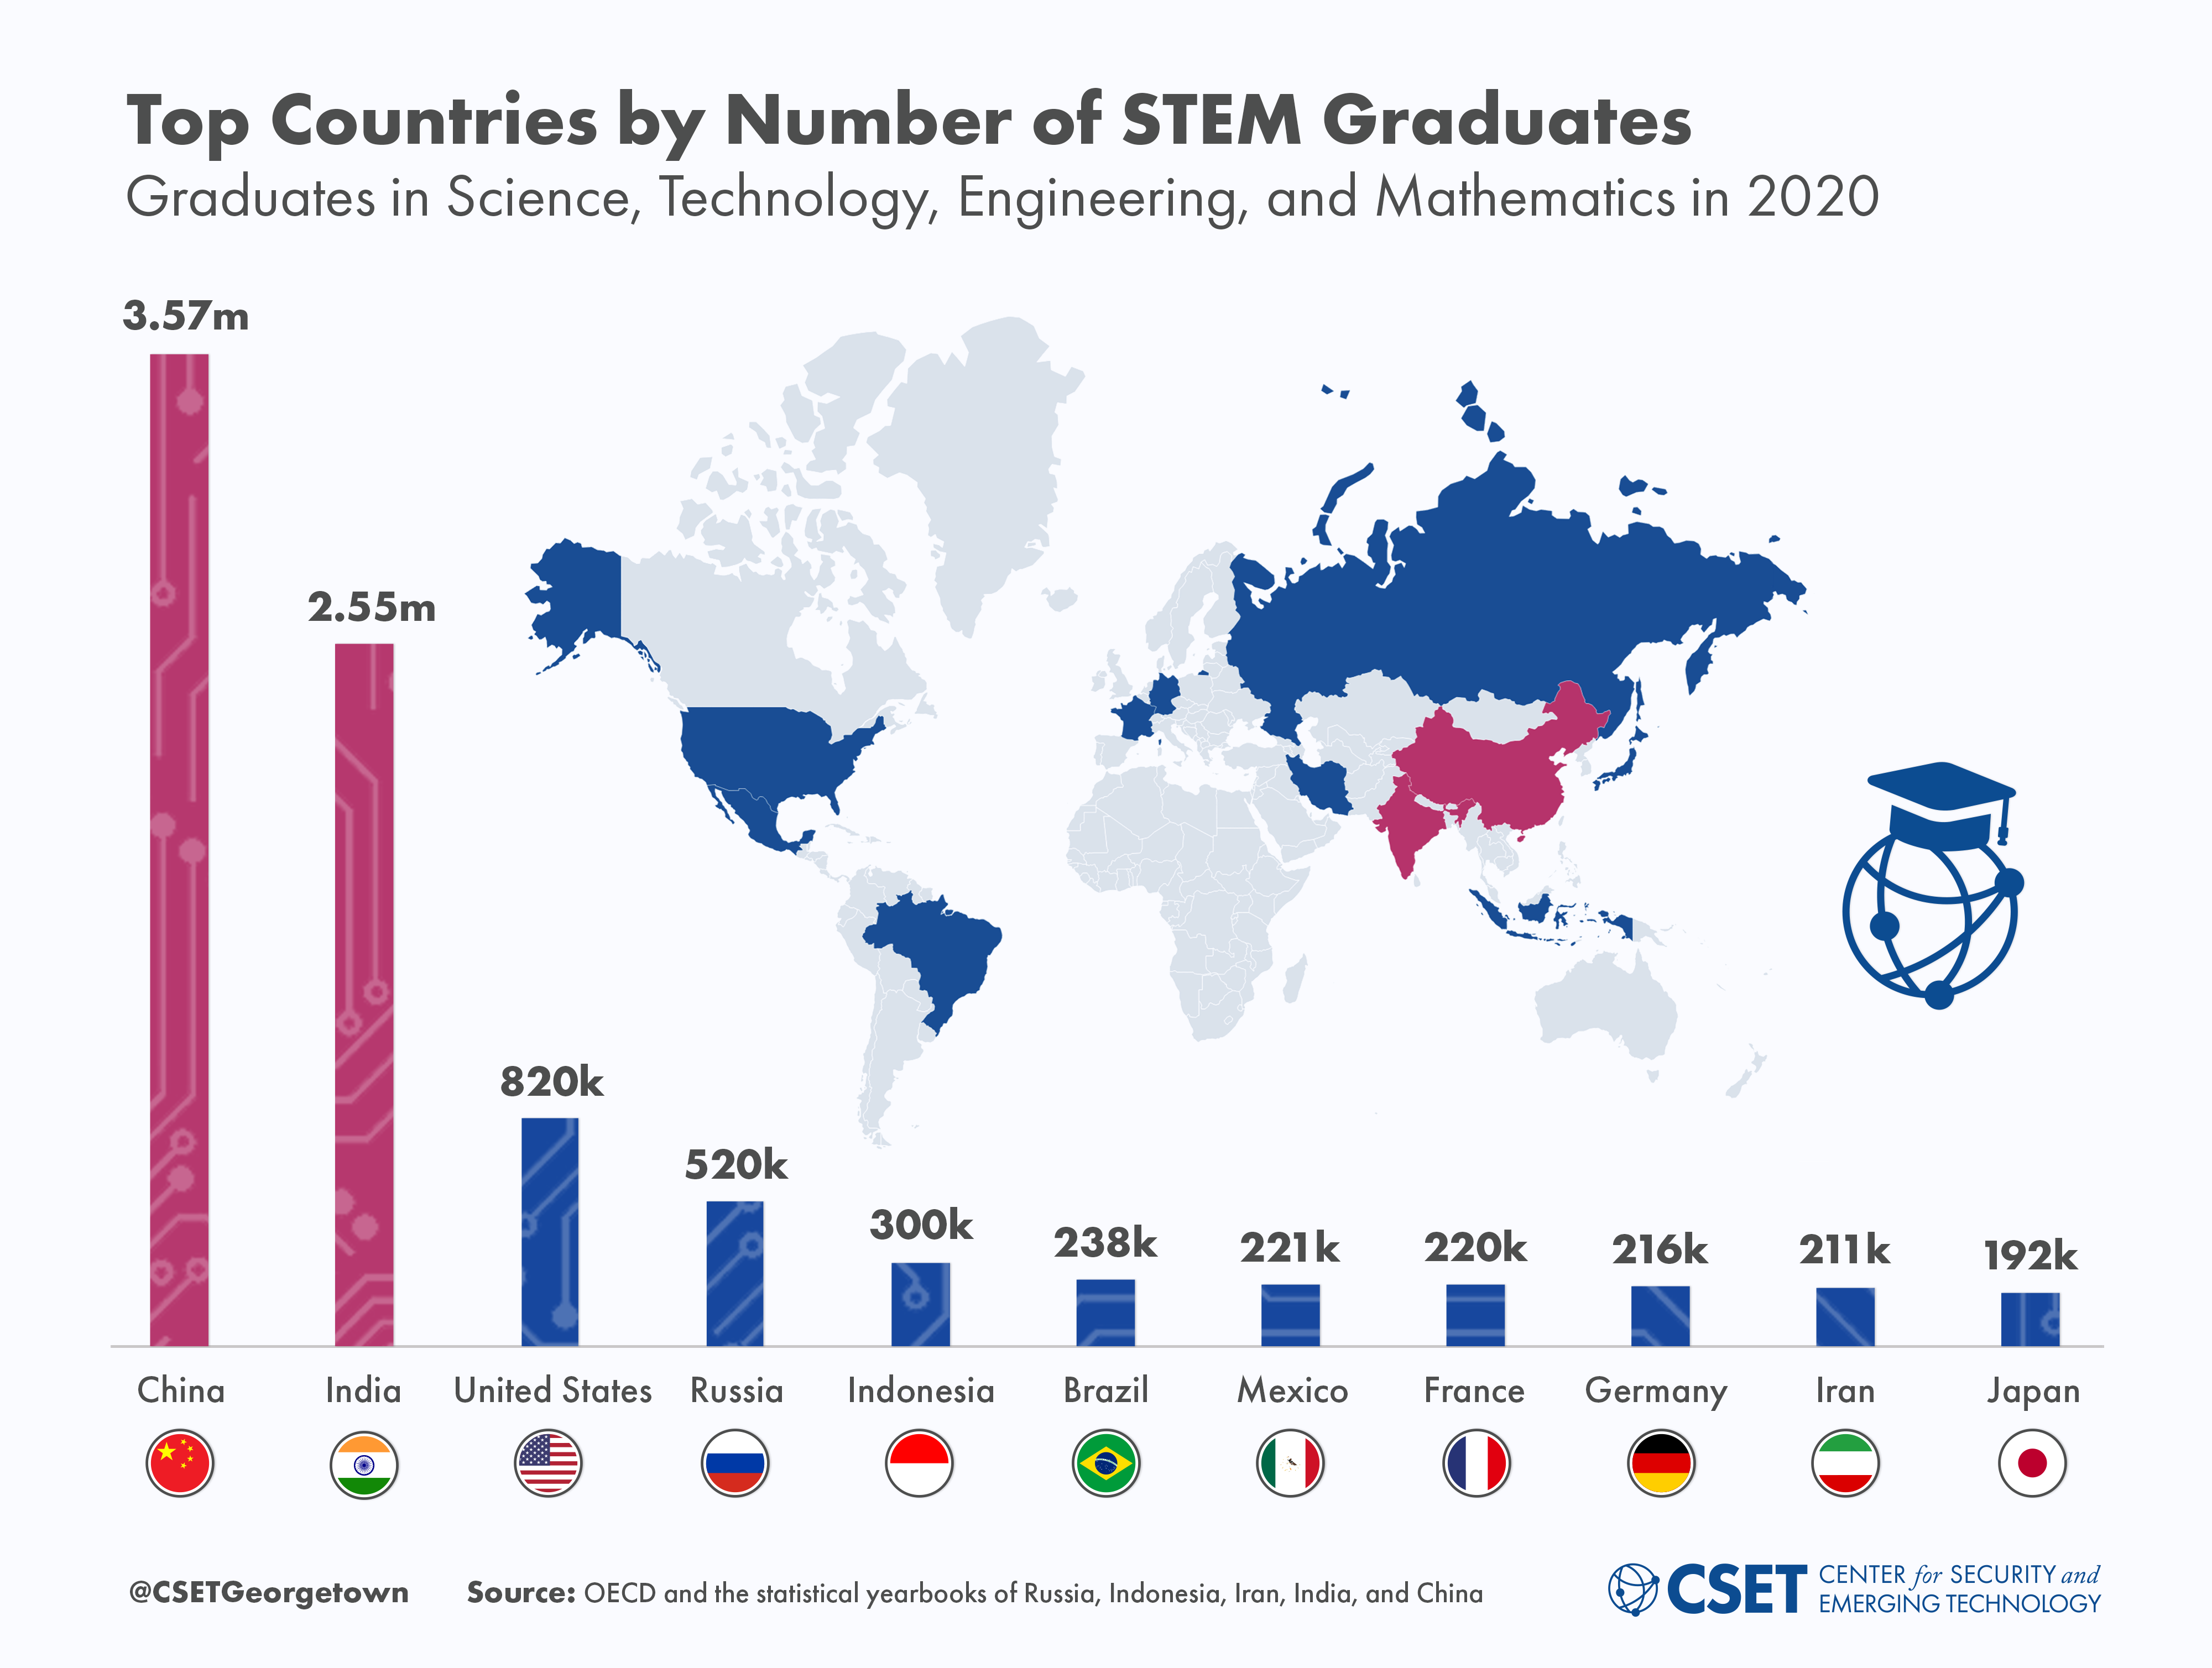 Graph showing 11 bars superimposed on a world map with the following countries highlighted. Each bar from left to right enumerates the total number of STEM graduates in that country in 2020: China: 3.57M graduates India: 2.55M U.S.: 820,000 Russia: 520,000 Indonesia: 200,000 Brazil: 238,000 Mexico: 221,000 France: 220,000 Germany: 216,000 Iran: 211,000 Japan: 192,000